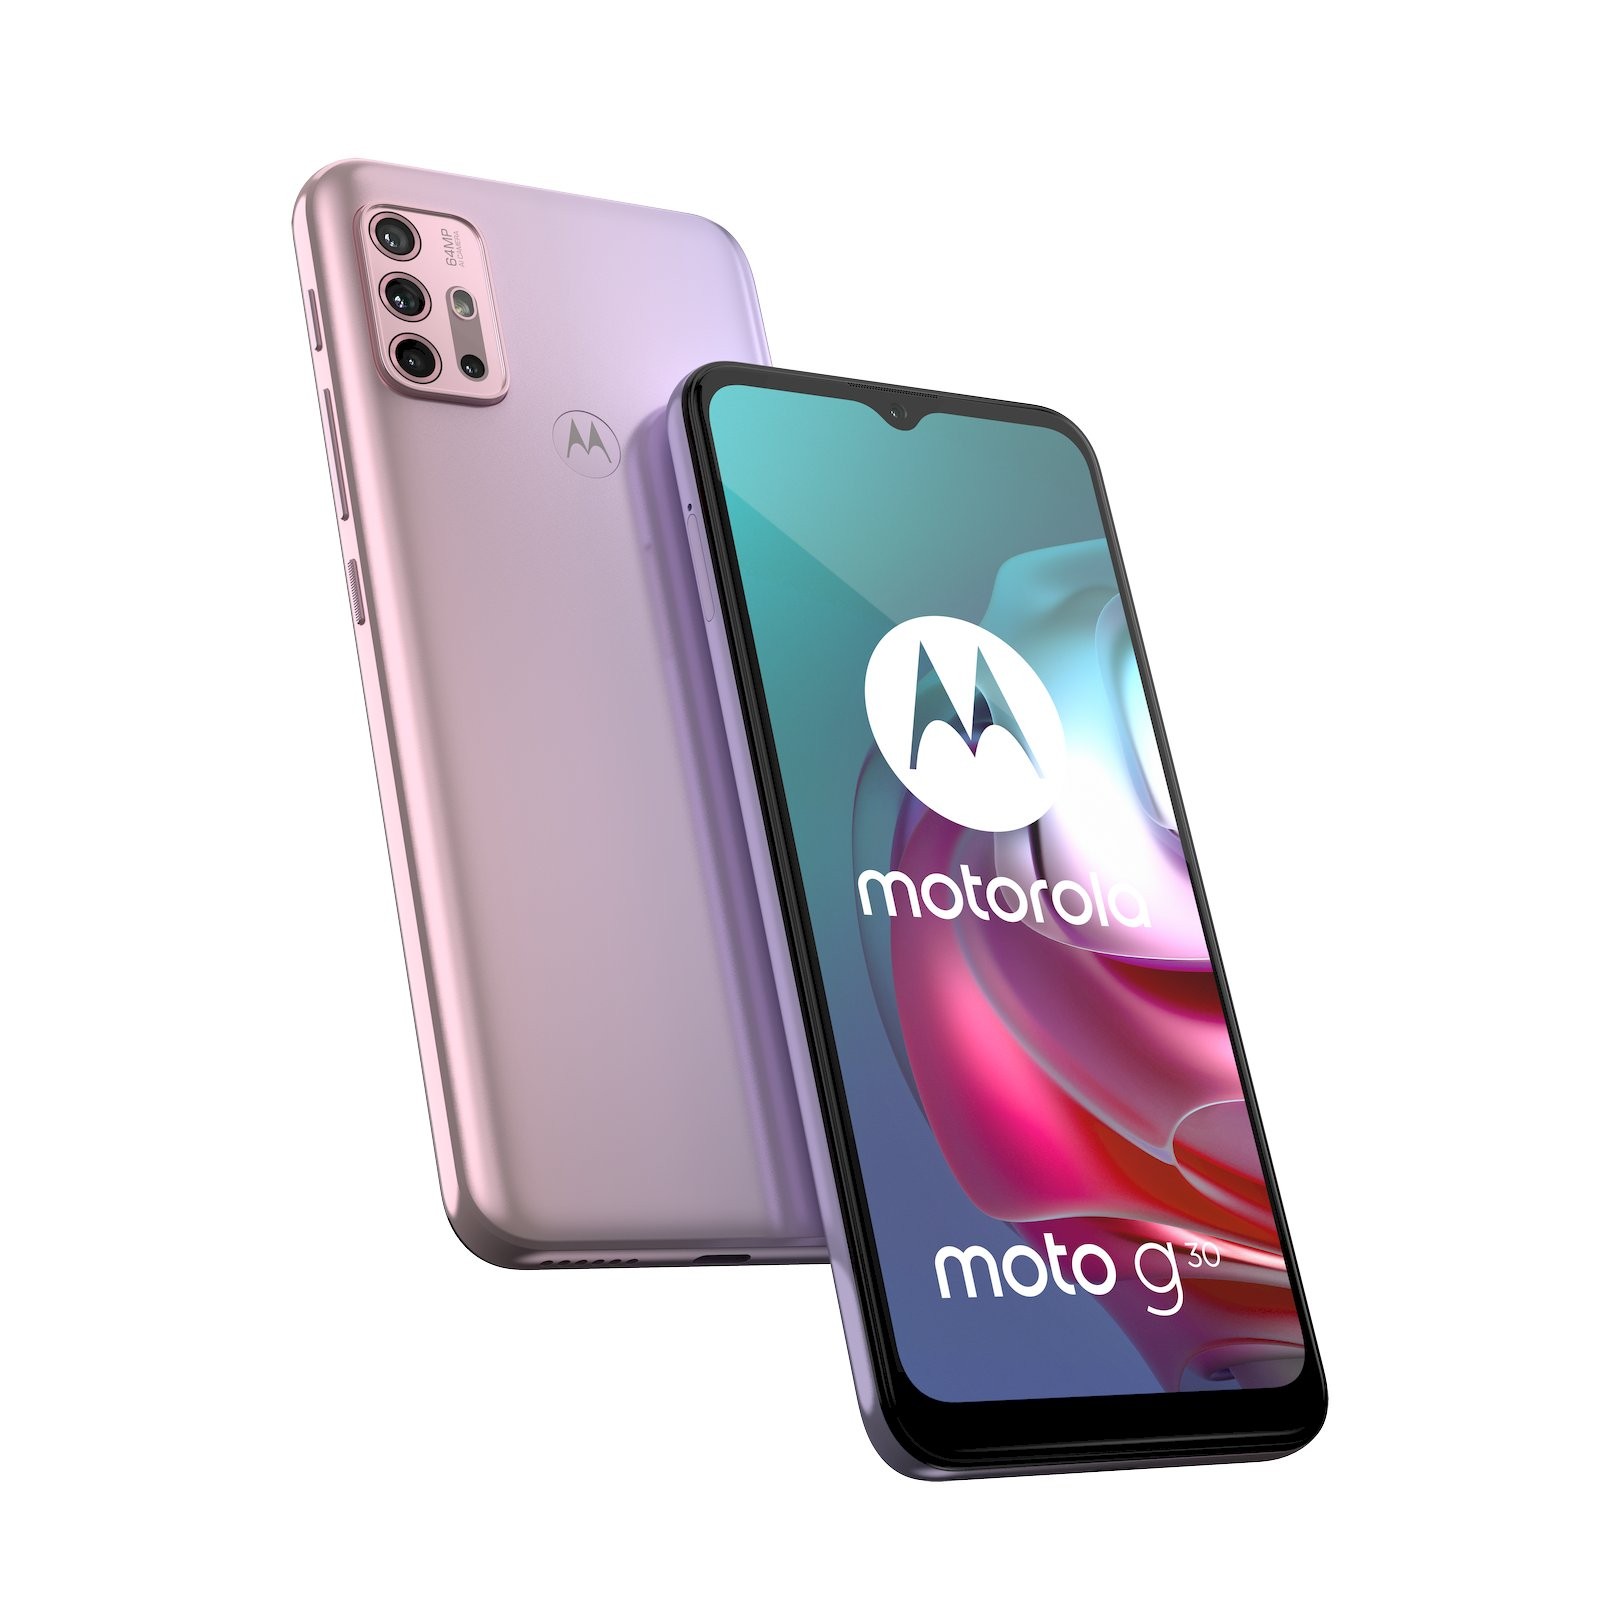 Motorola Moto G30 phone specifications and price, and its most 